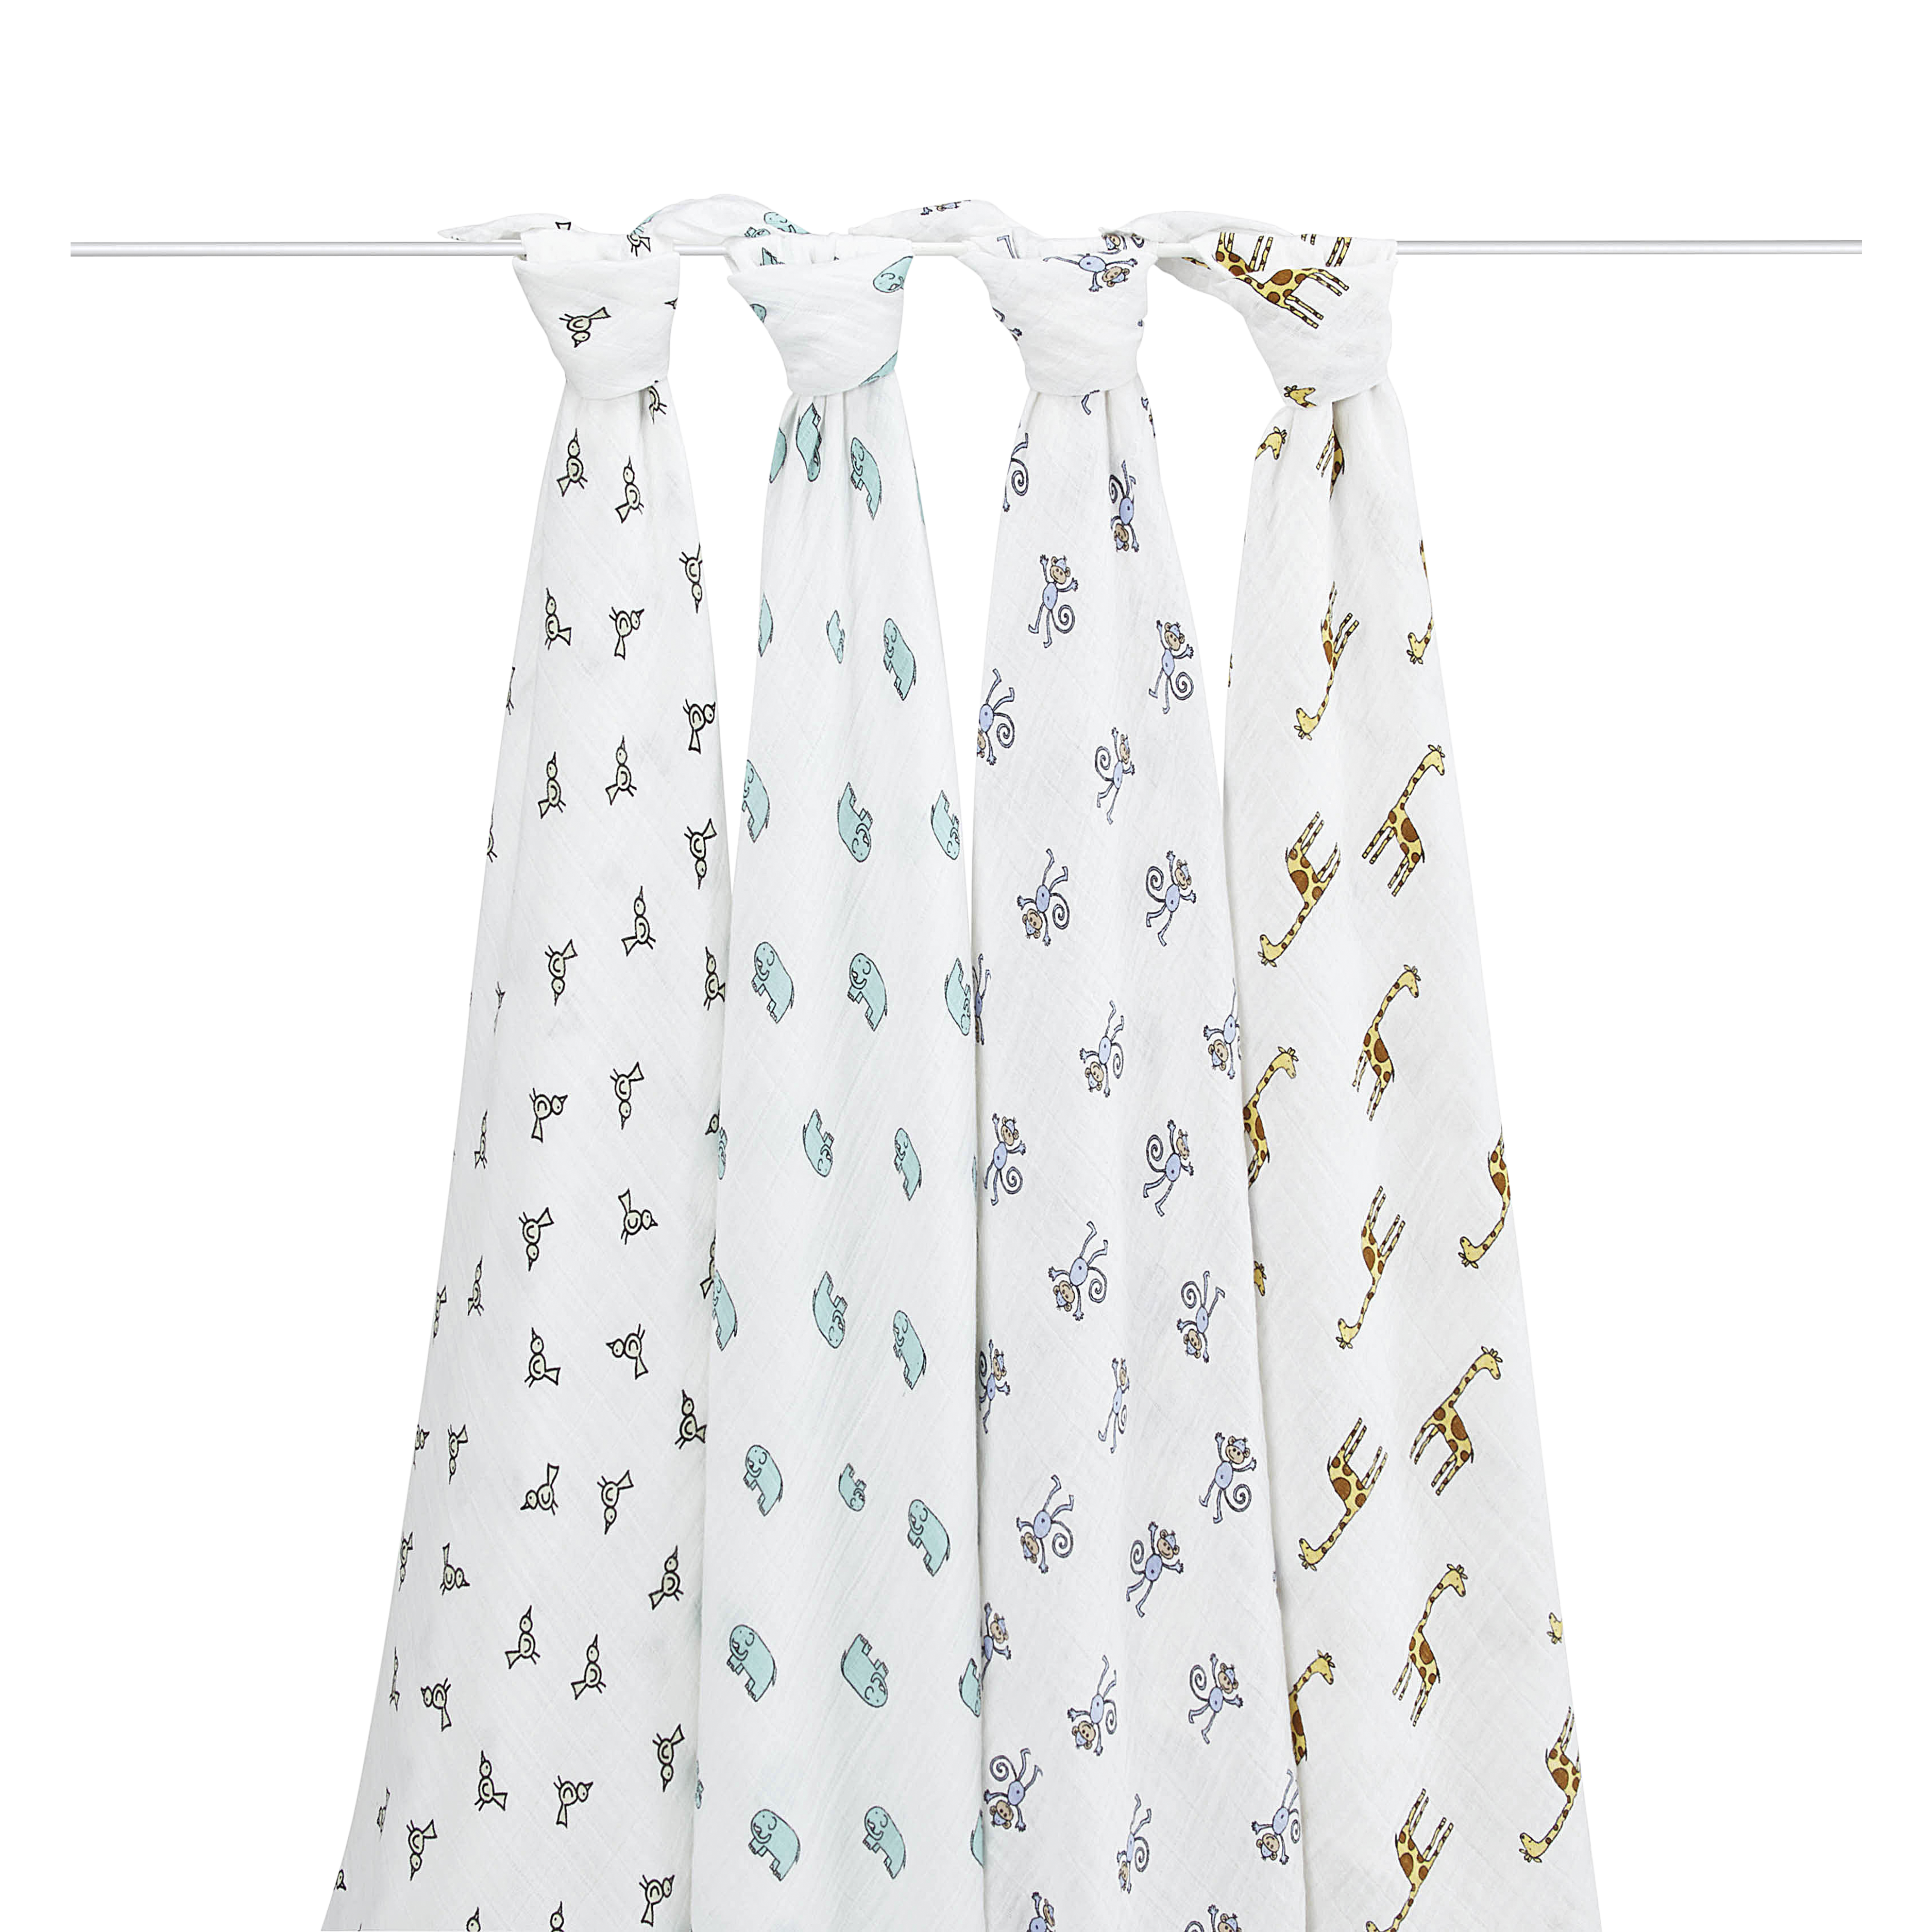 aden and anais classic swaddle